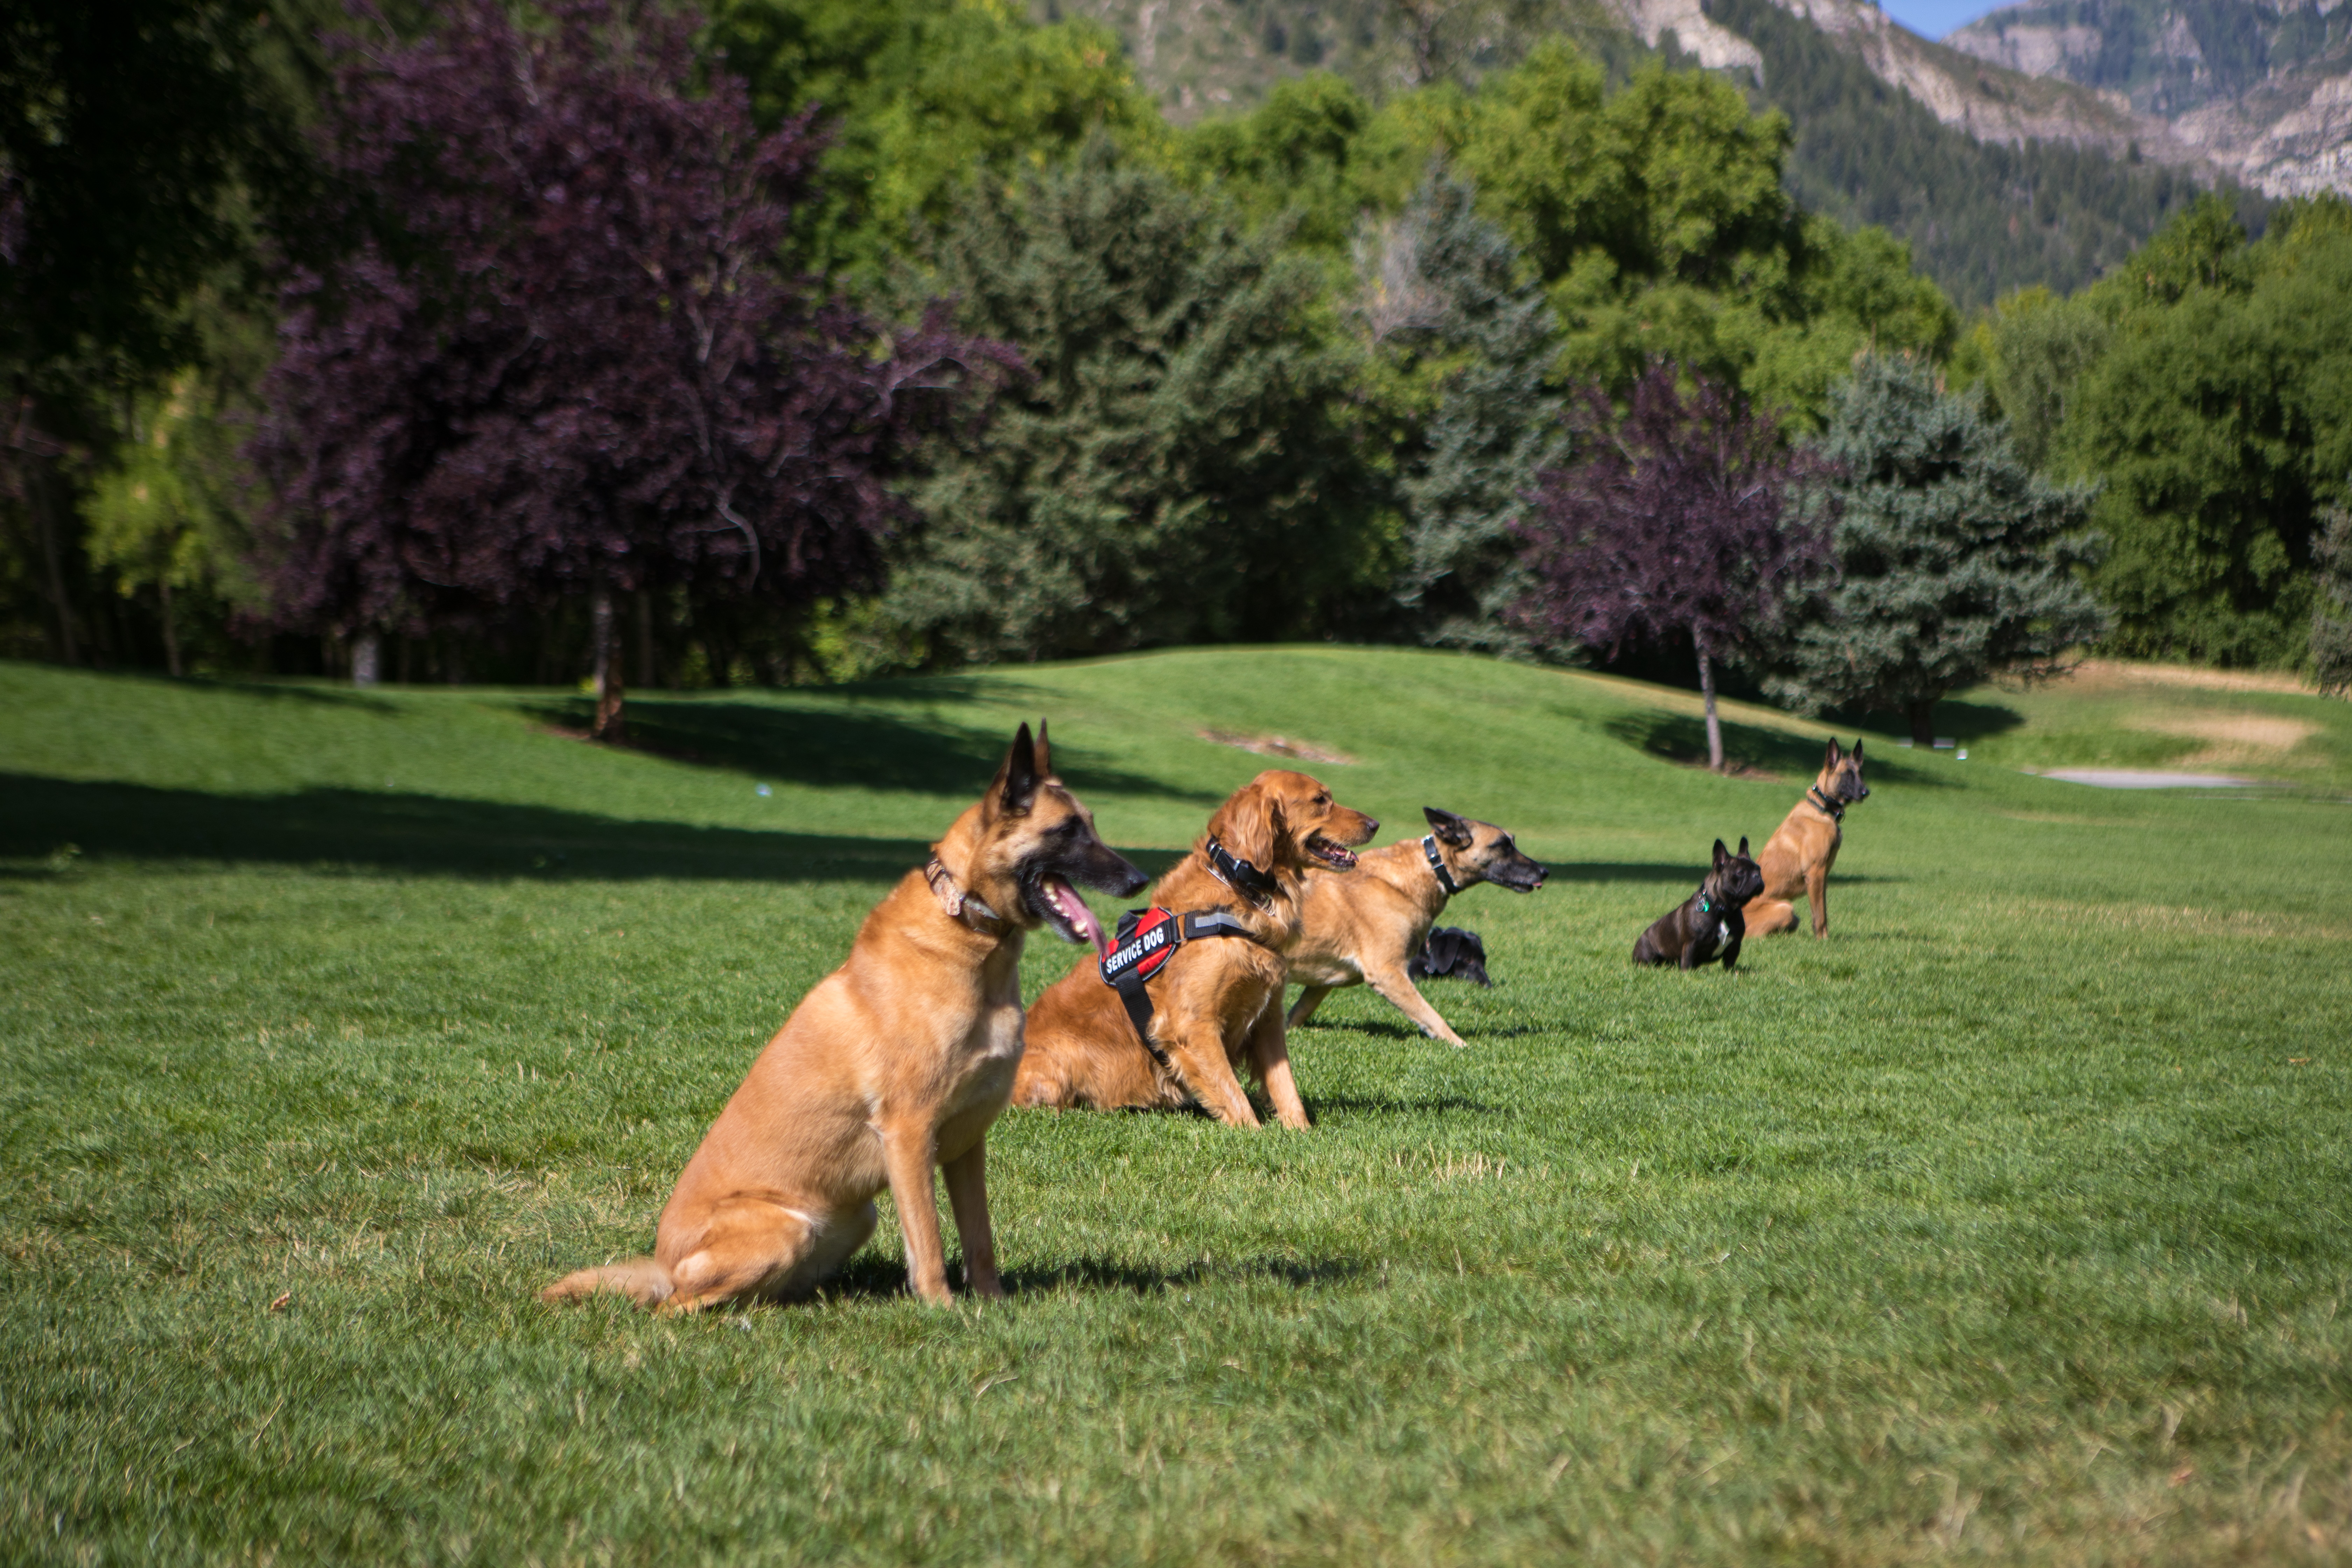 Different dog breeds benefits from the dog training classes at Dog Training Elite.